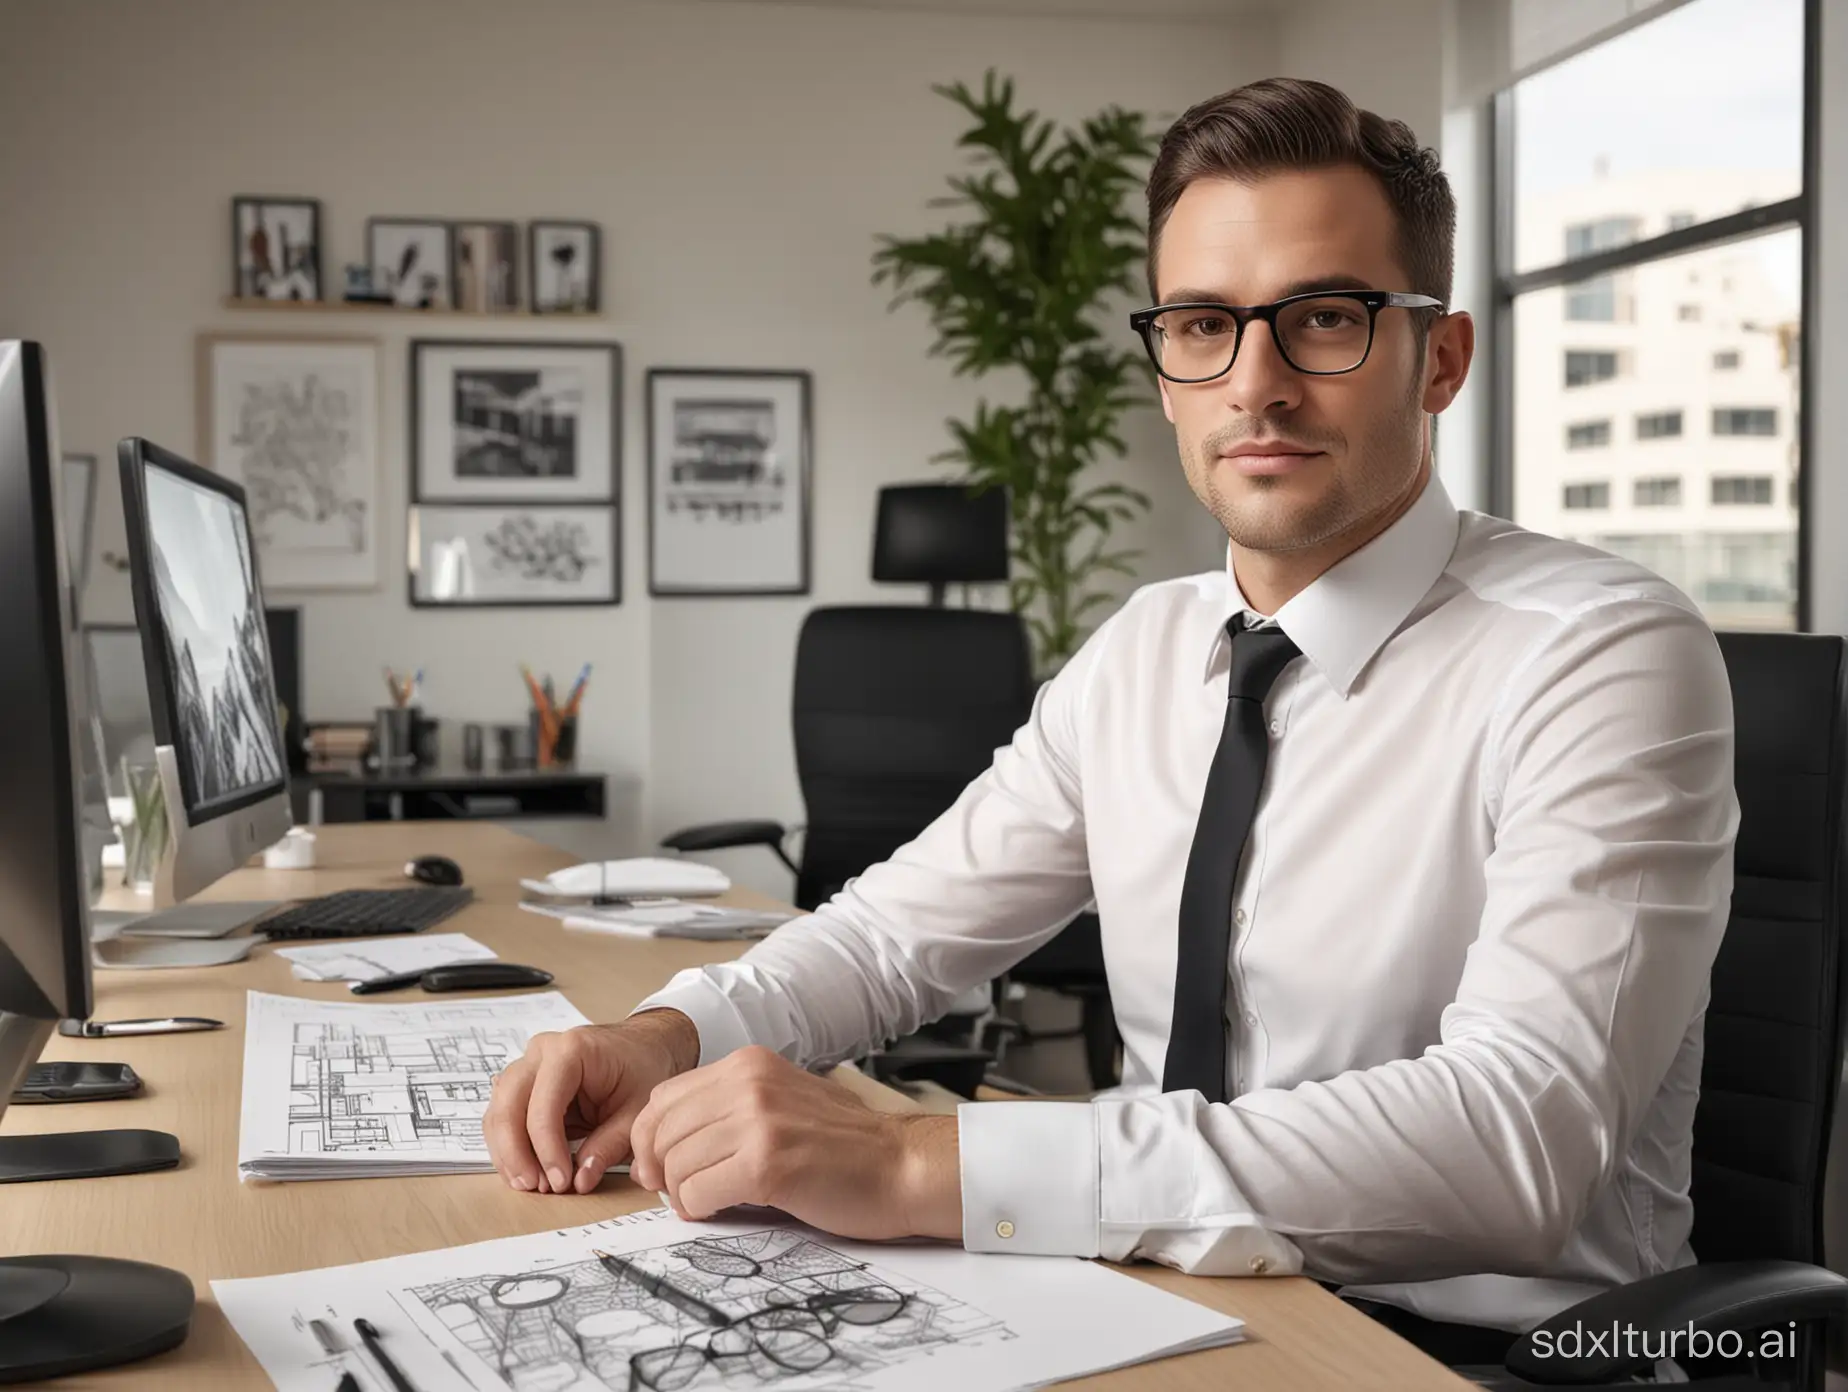 Male-Office-Worker-Drawing-at-Computer-Desk-in-Realistic-Office-Setting